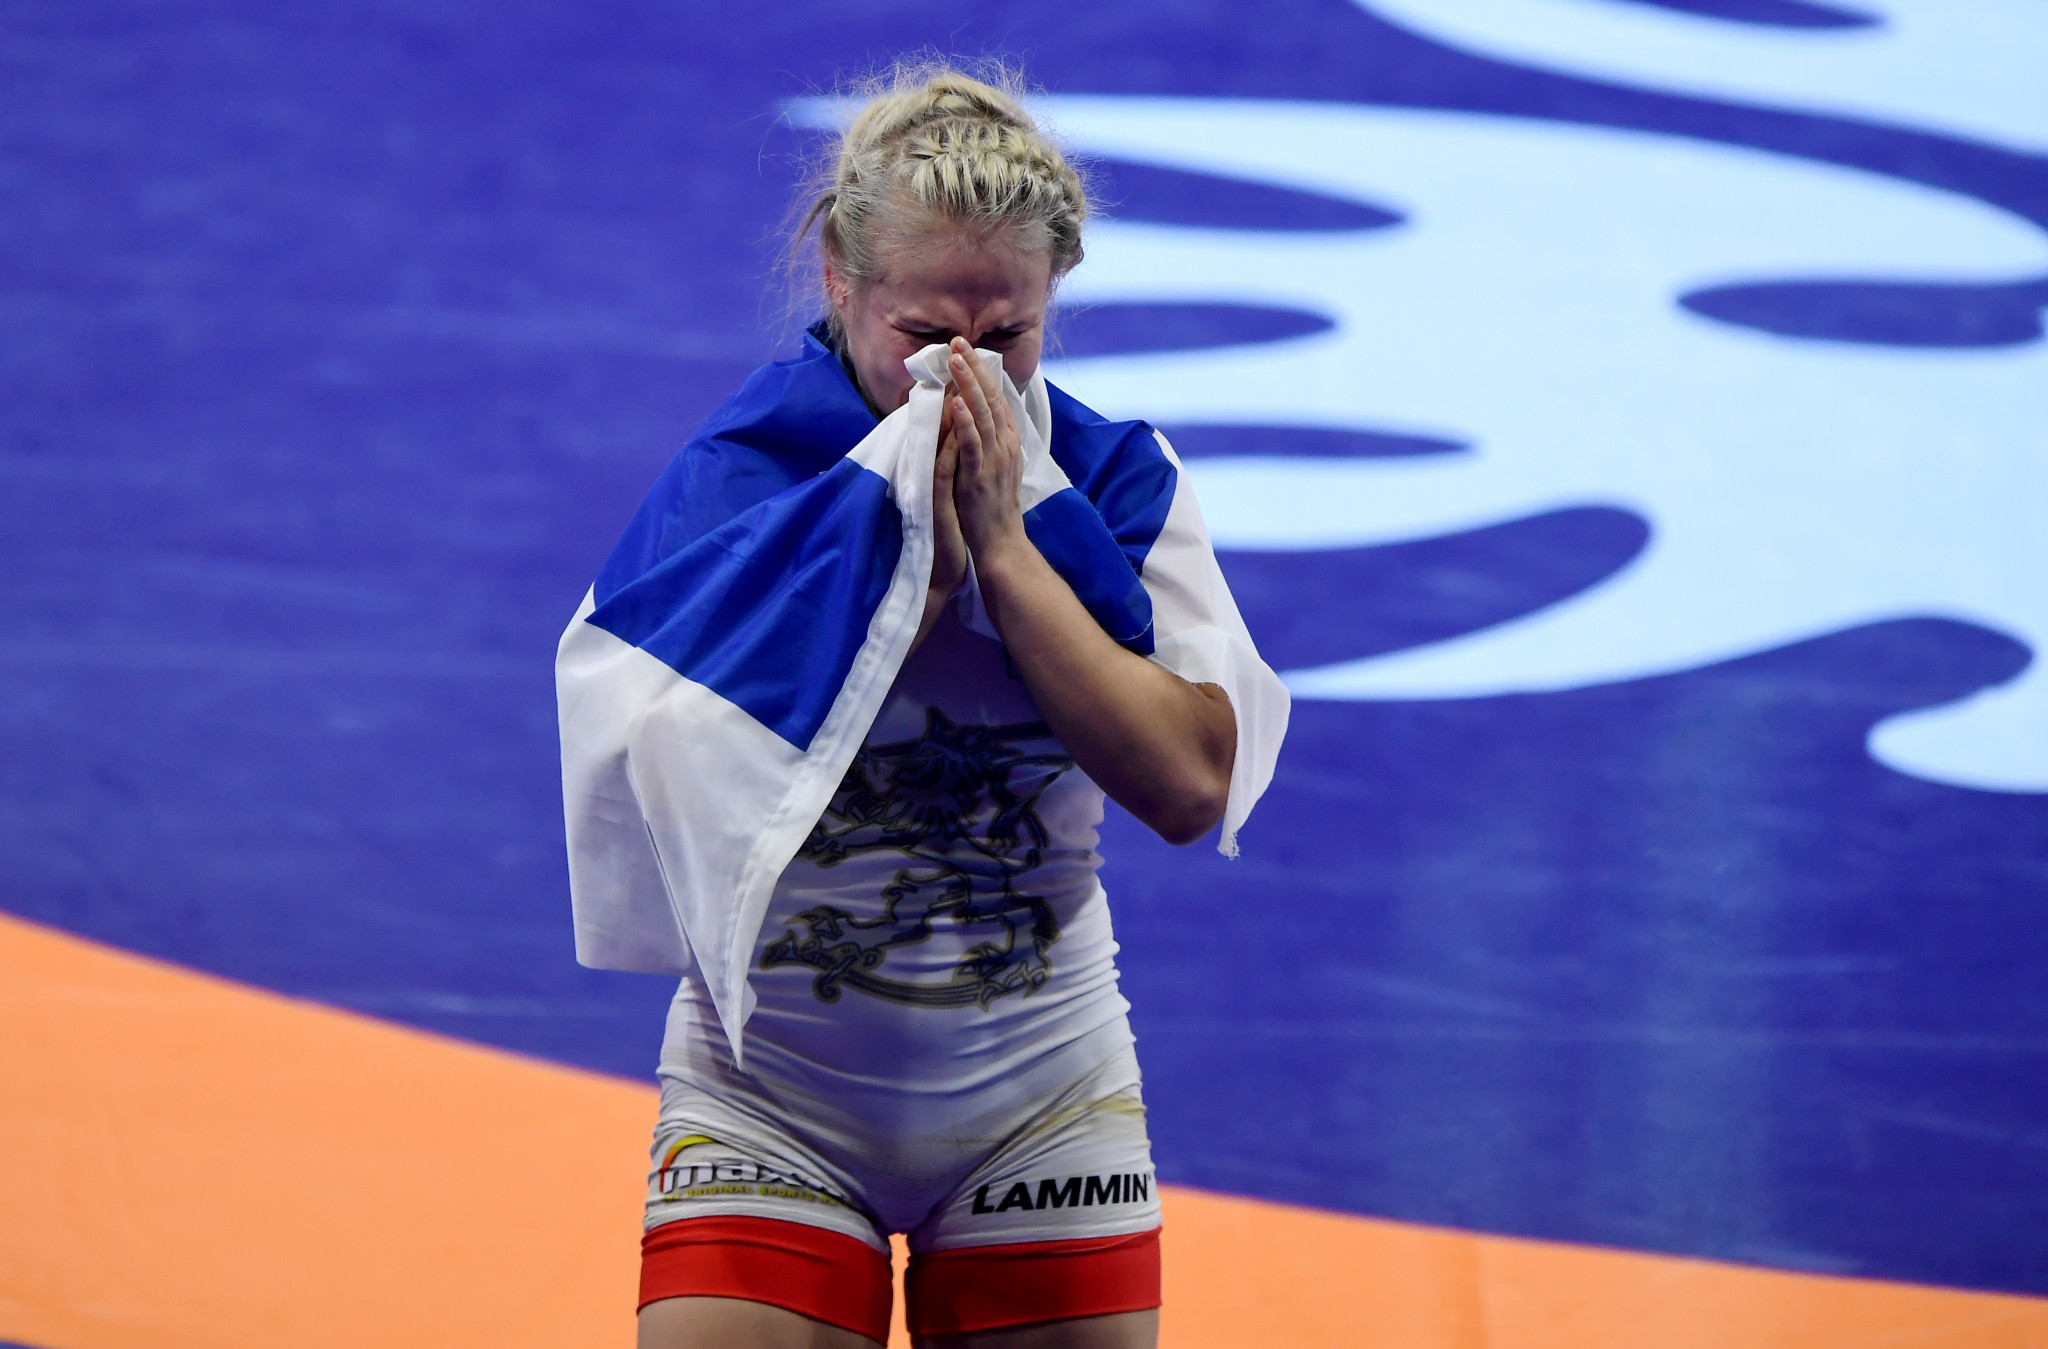 Finland's Petra Olli won 62kg gold after a last second takedown from her opponent sparked confusion ©Getty Images